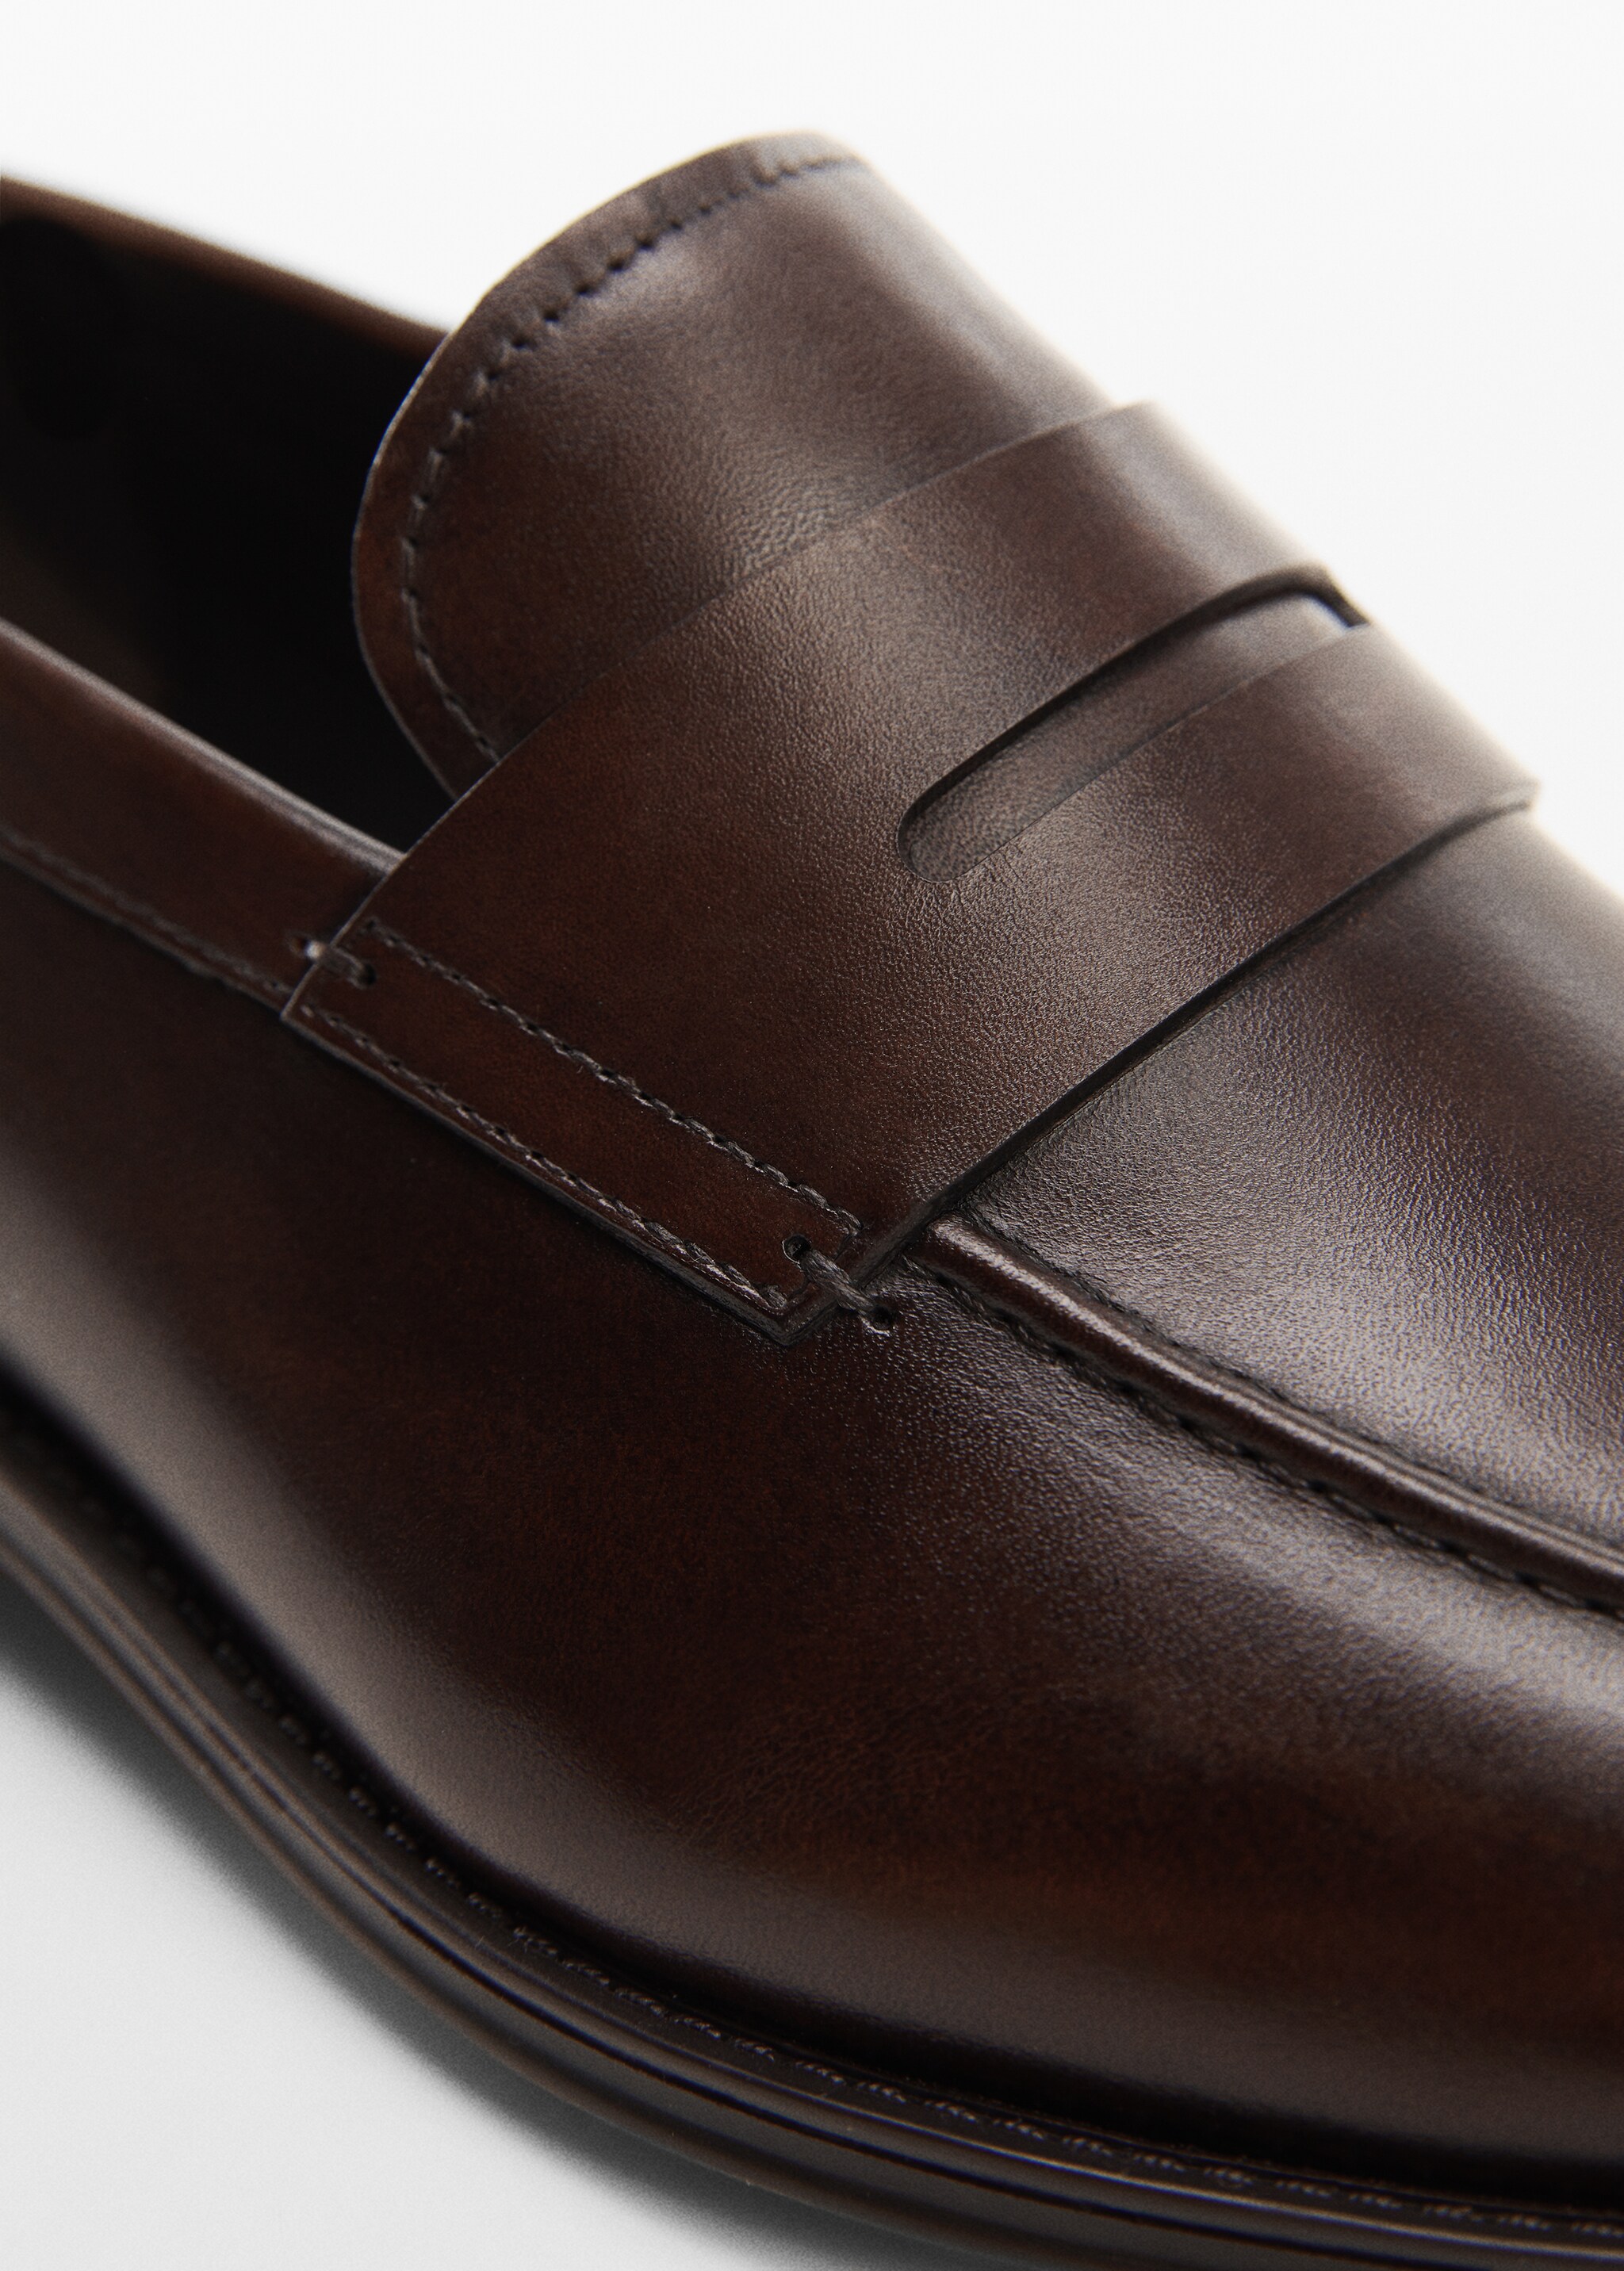 Aged-leather loafers - Details of the article 3